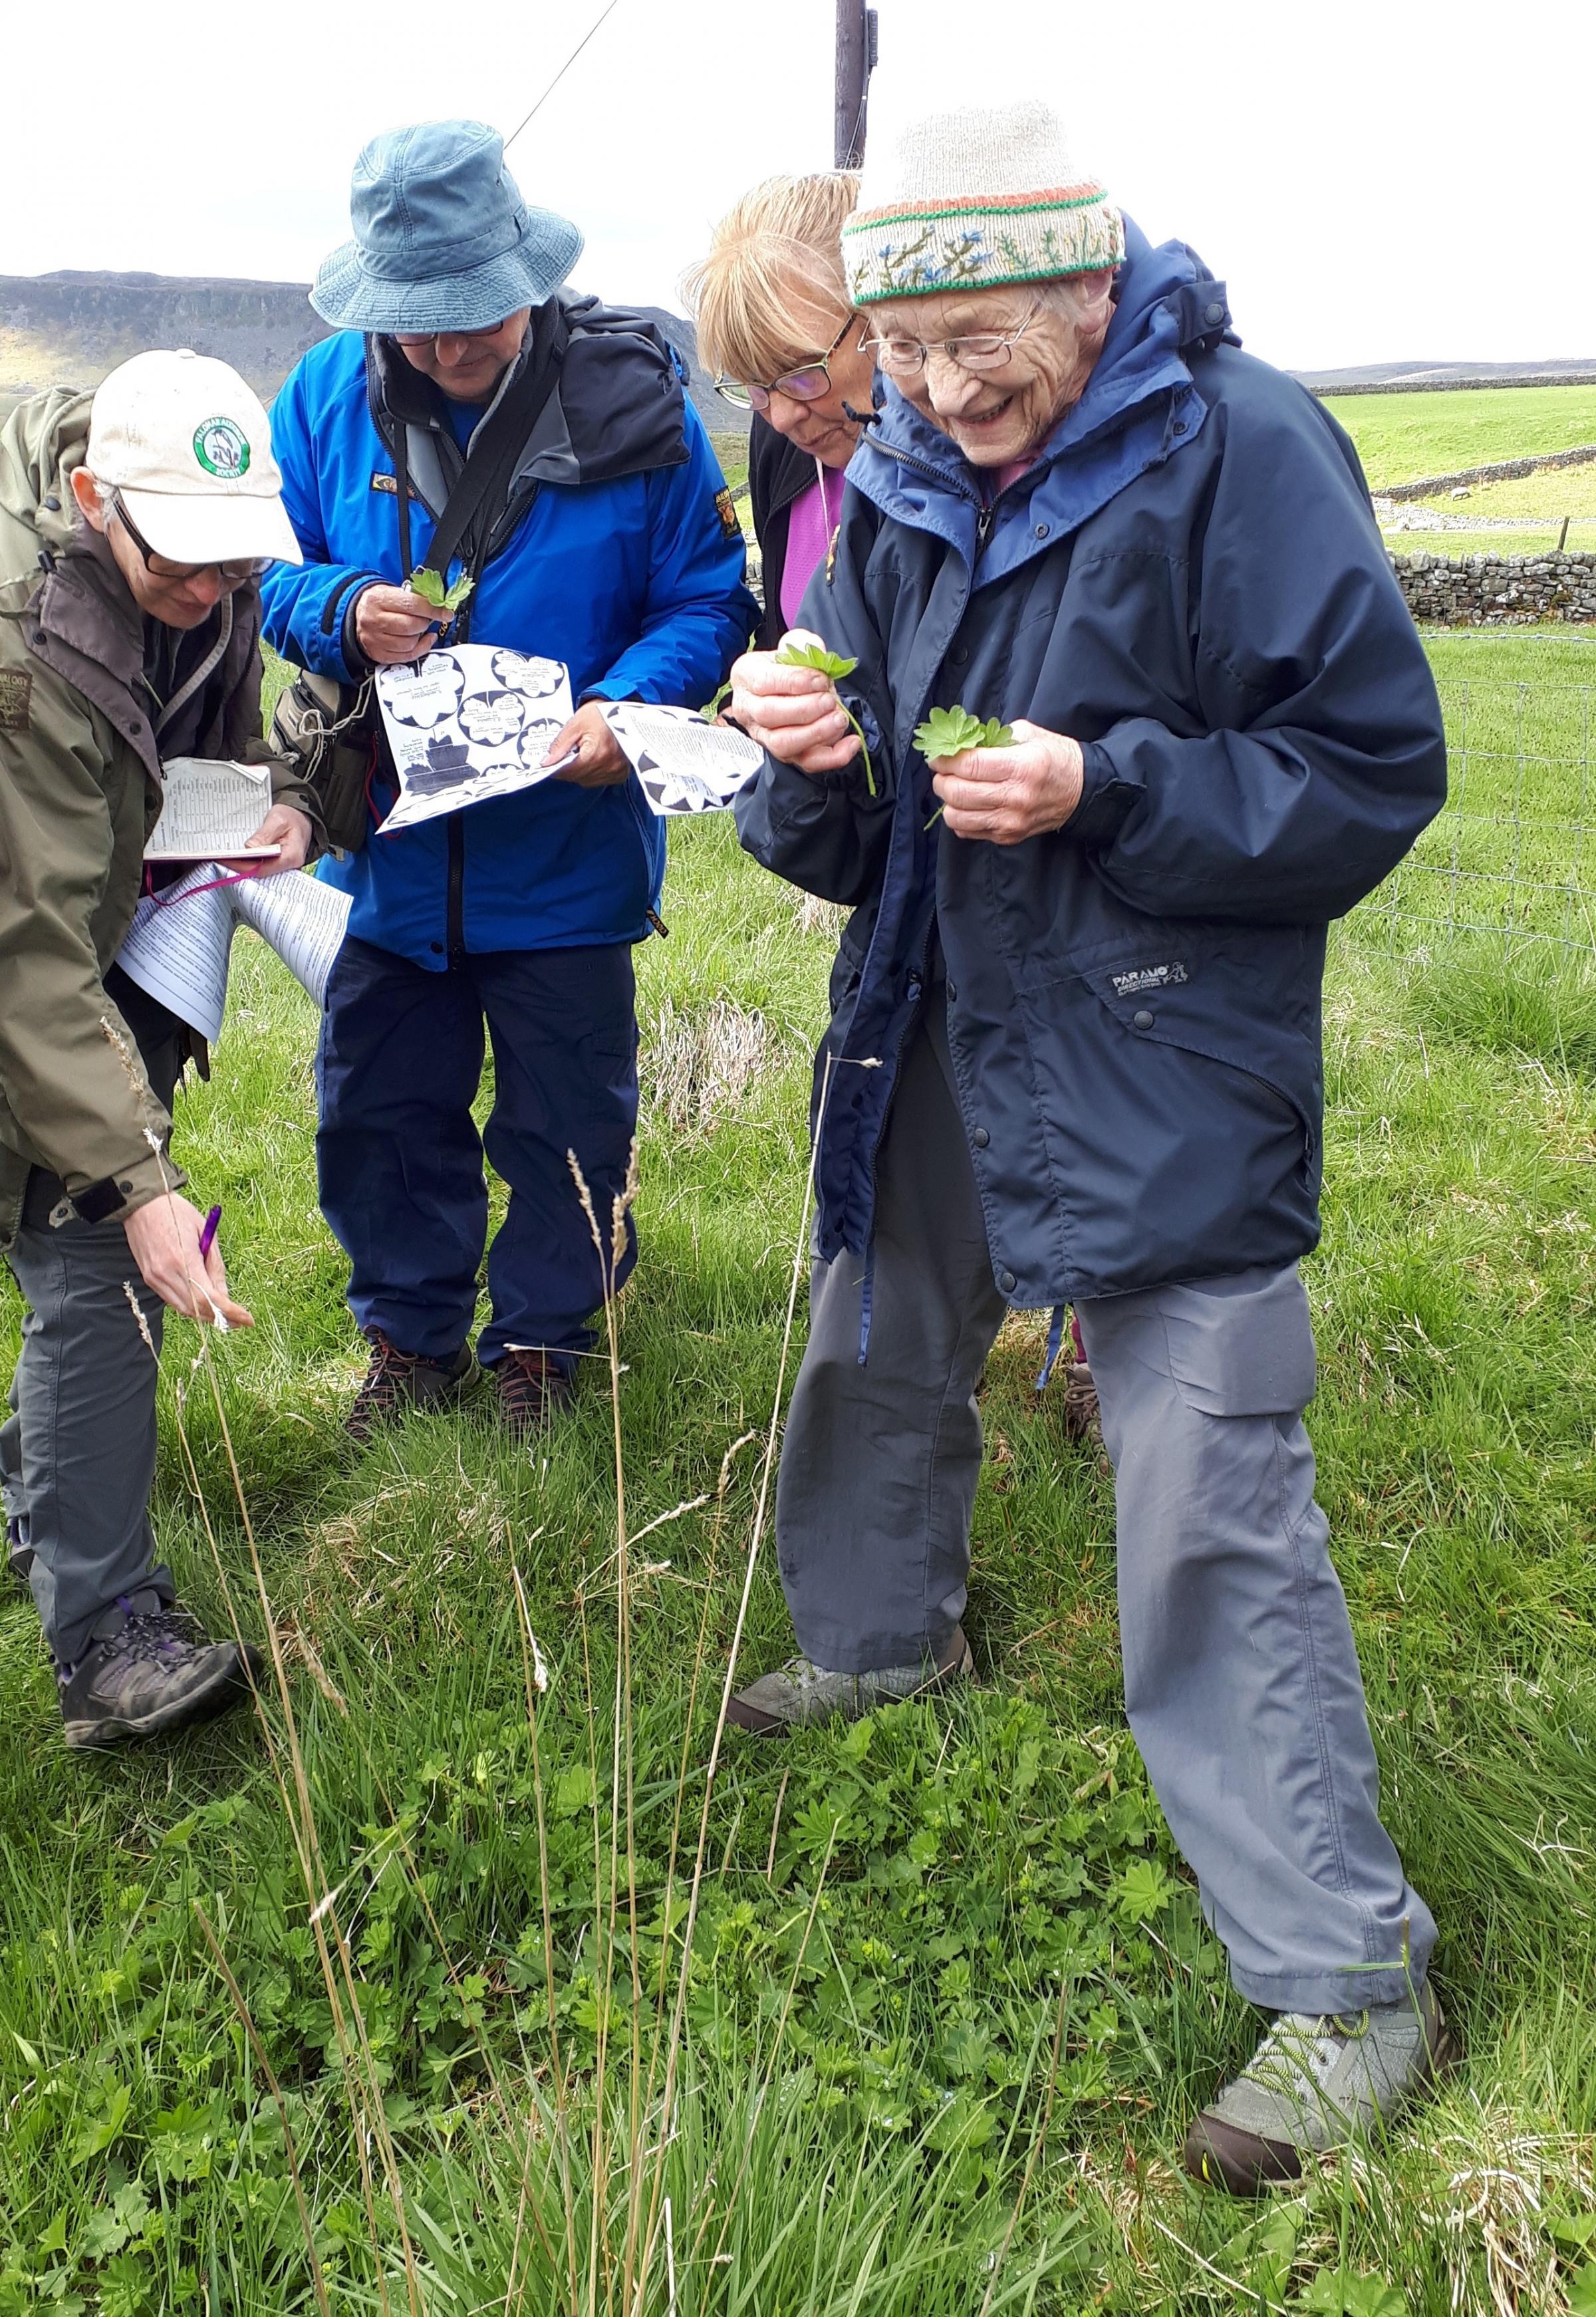 Dr Margaret Bradshaw, founder of Dr M.E. Bradshaw’s Teesdale Special Flora Research & Conservation Trust, teaching